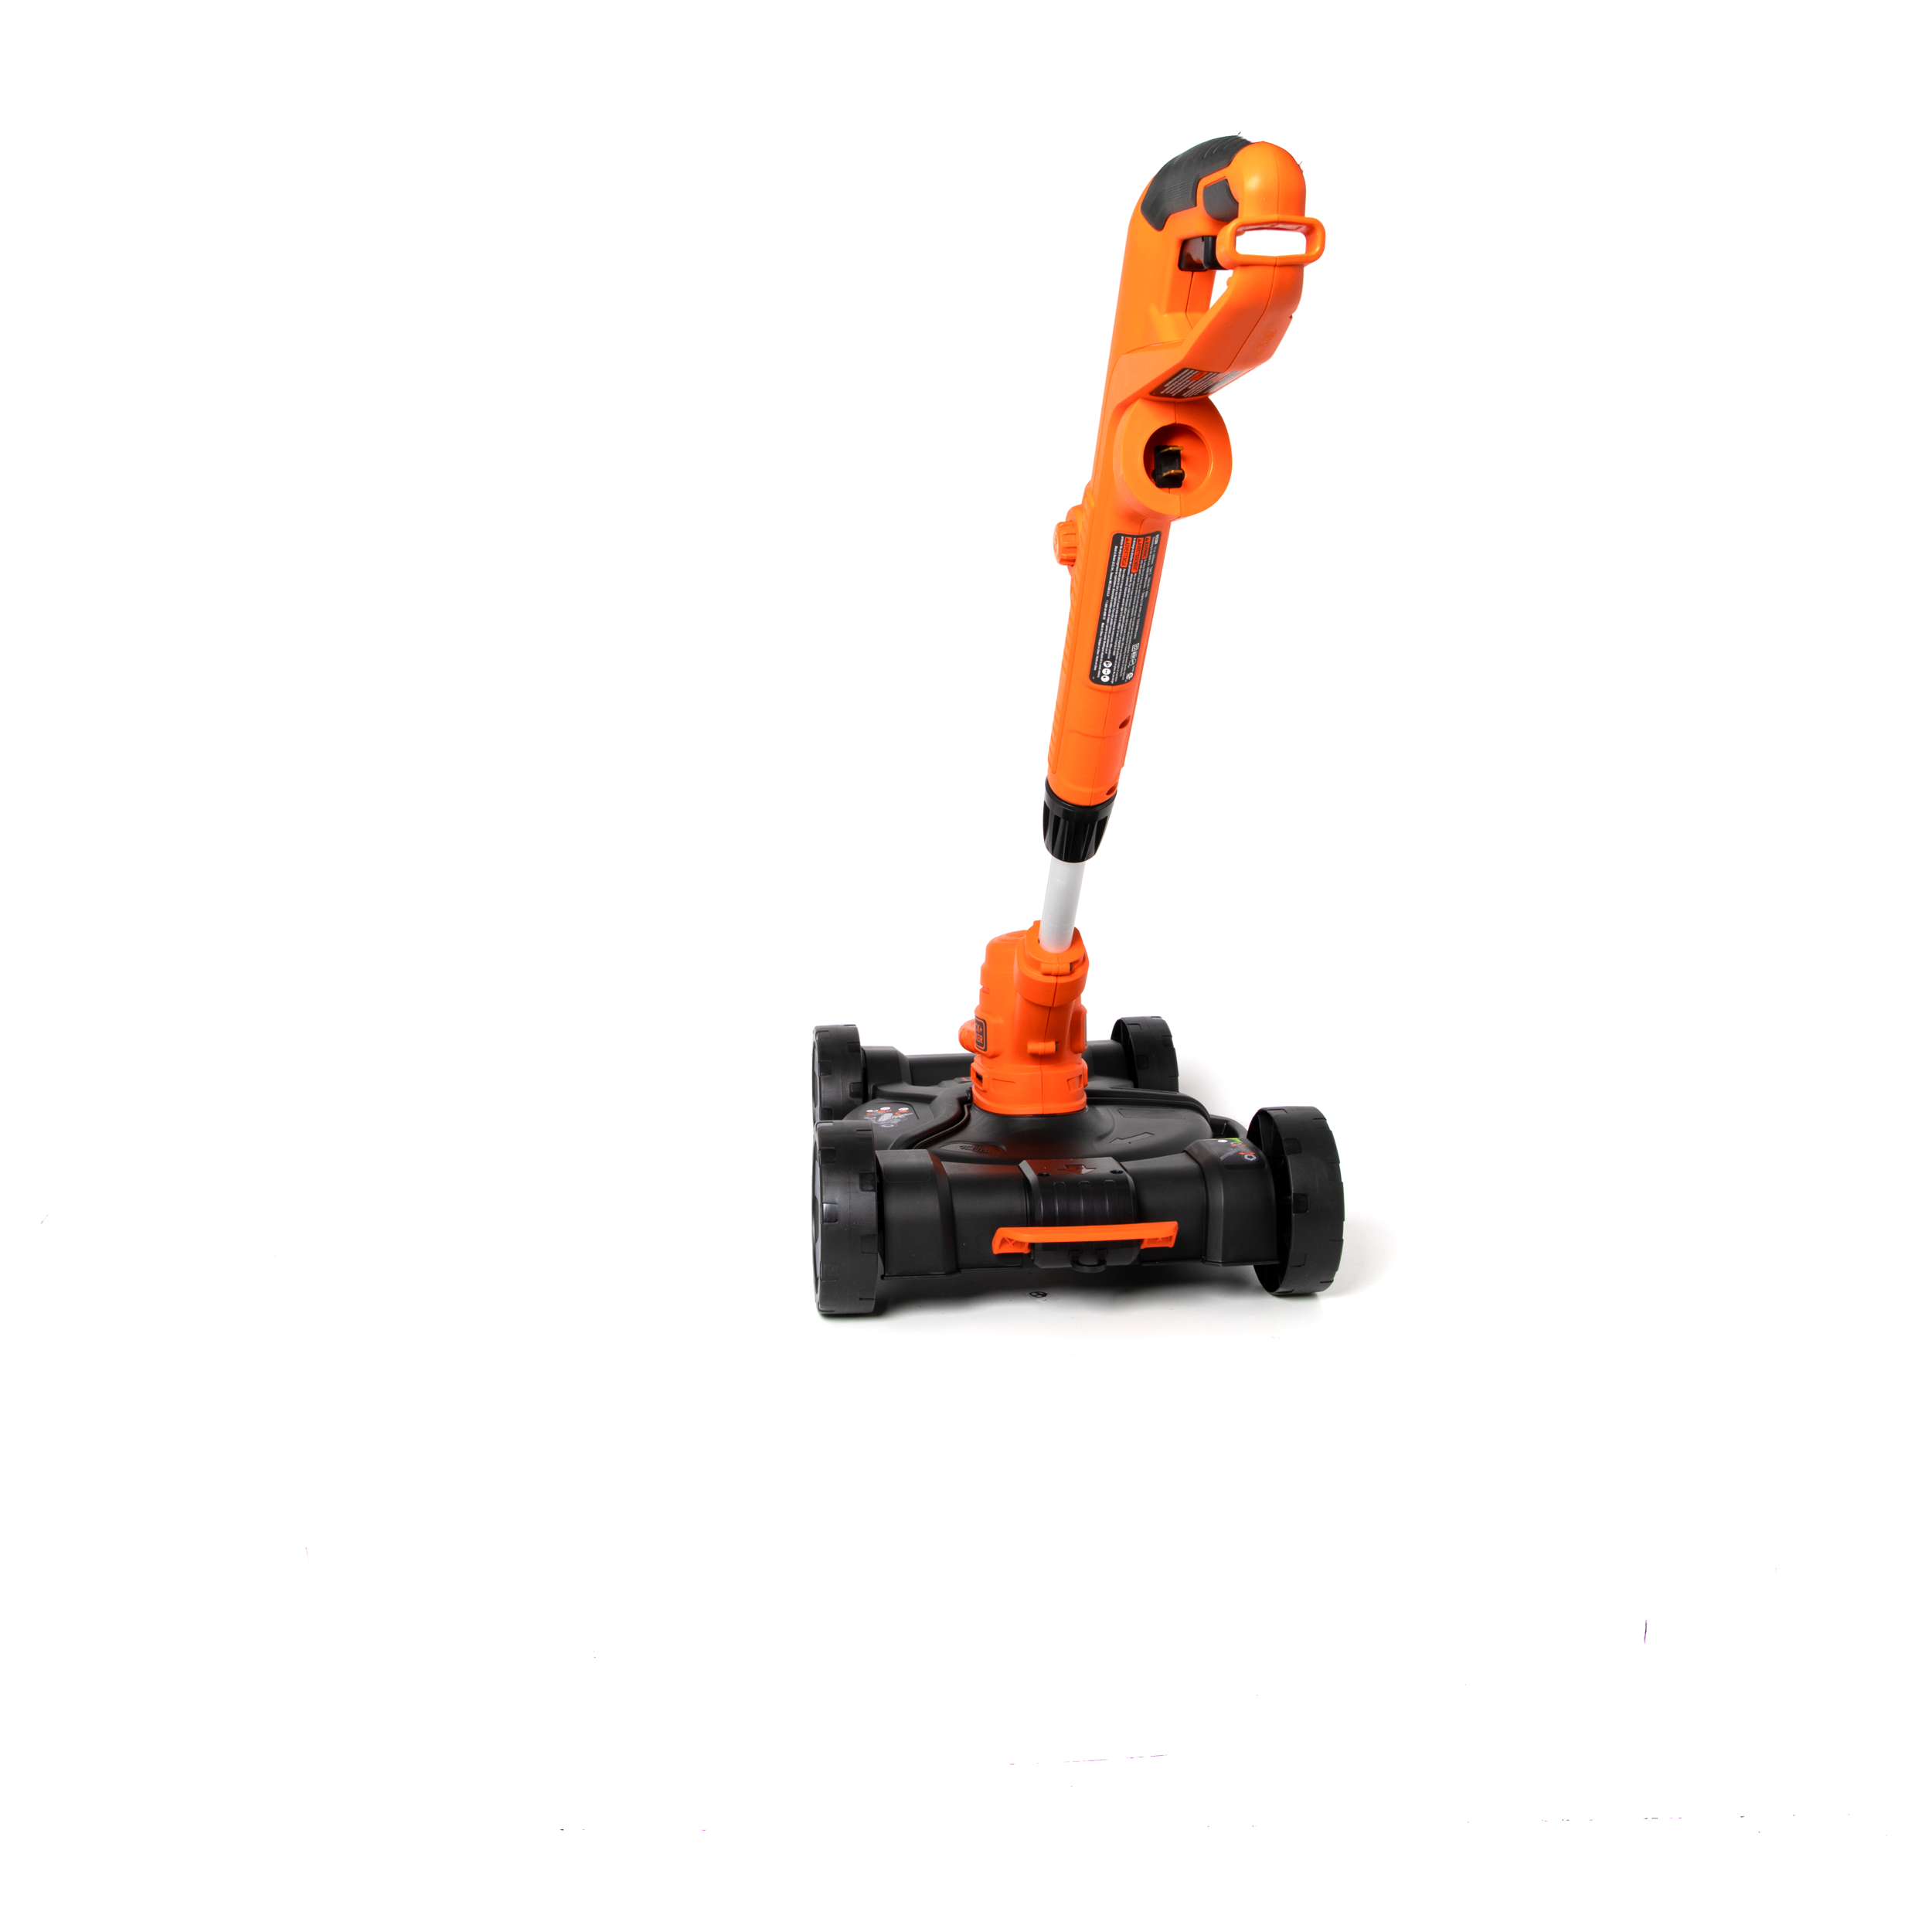 BLACK+DECKER 3-in-1 Lawn Mower, String Trimmer and Edger, 12-Inch (MTC220)  